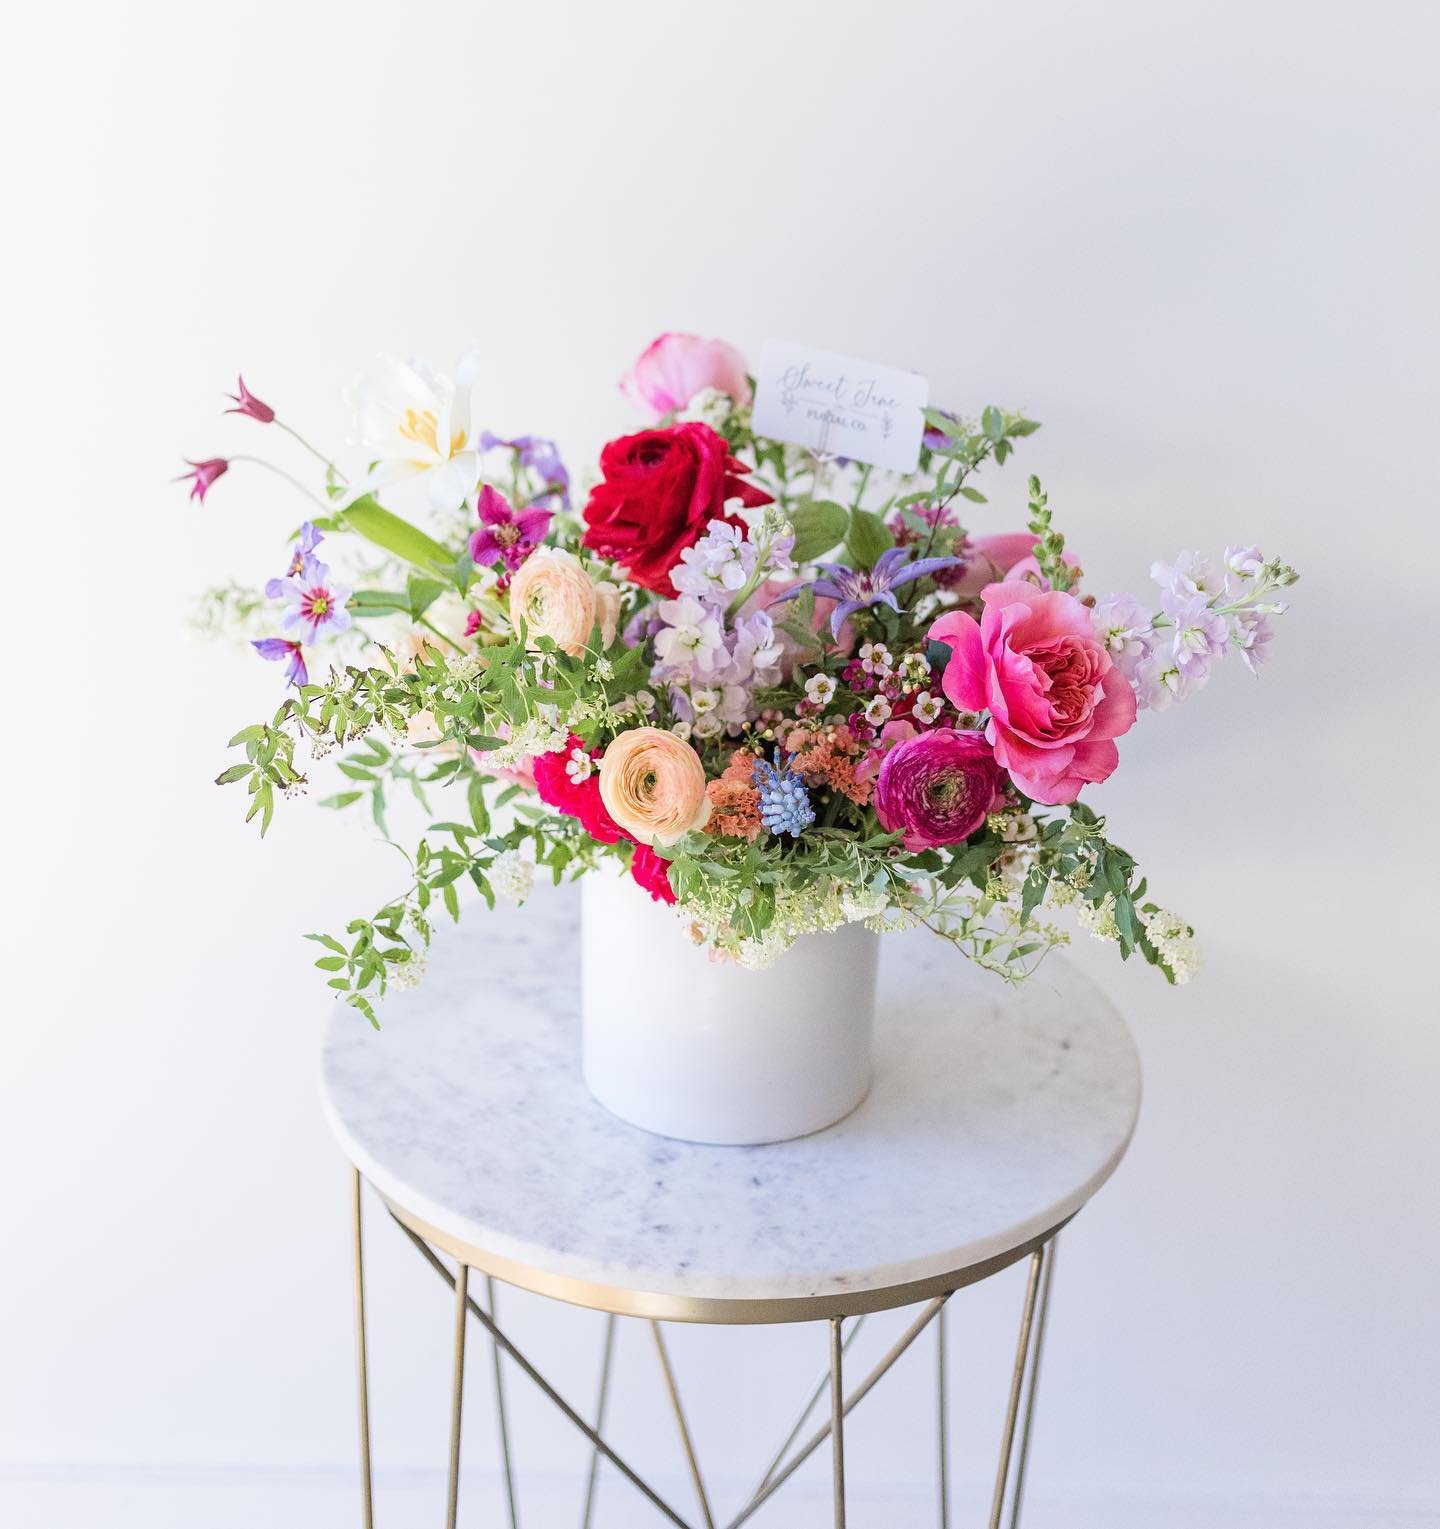 Mother&rsquo;s Day arrangements are live on the website! Arrangements will feature a stunning selection of local flowers, high-end varieties, and unique textures. 

Let&rsquo;s treat all those amazing mamas to something truly special! Head to the web